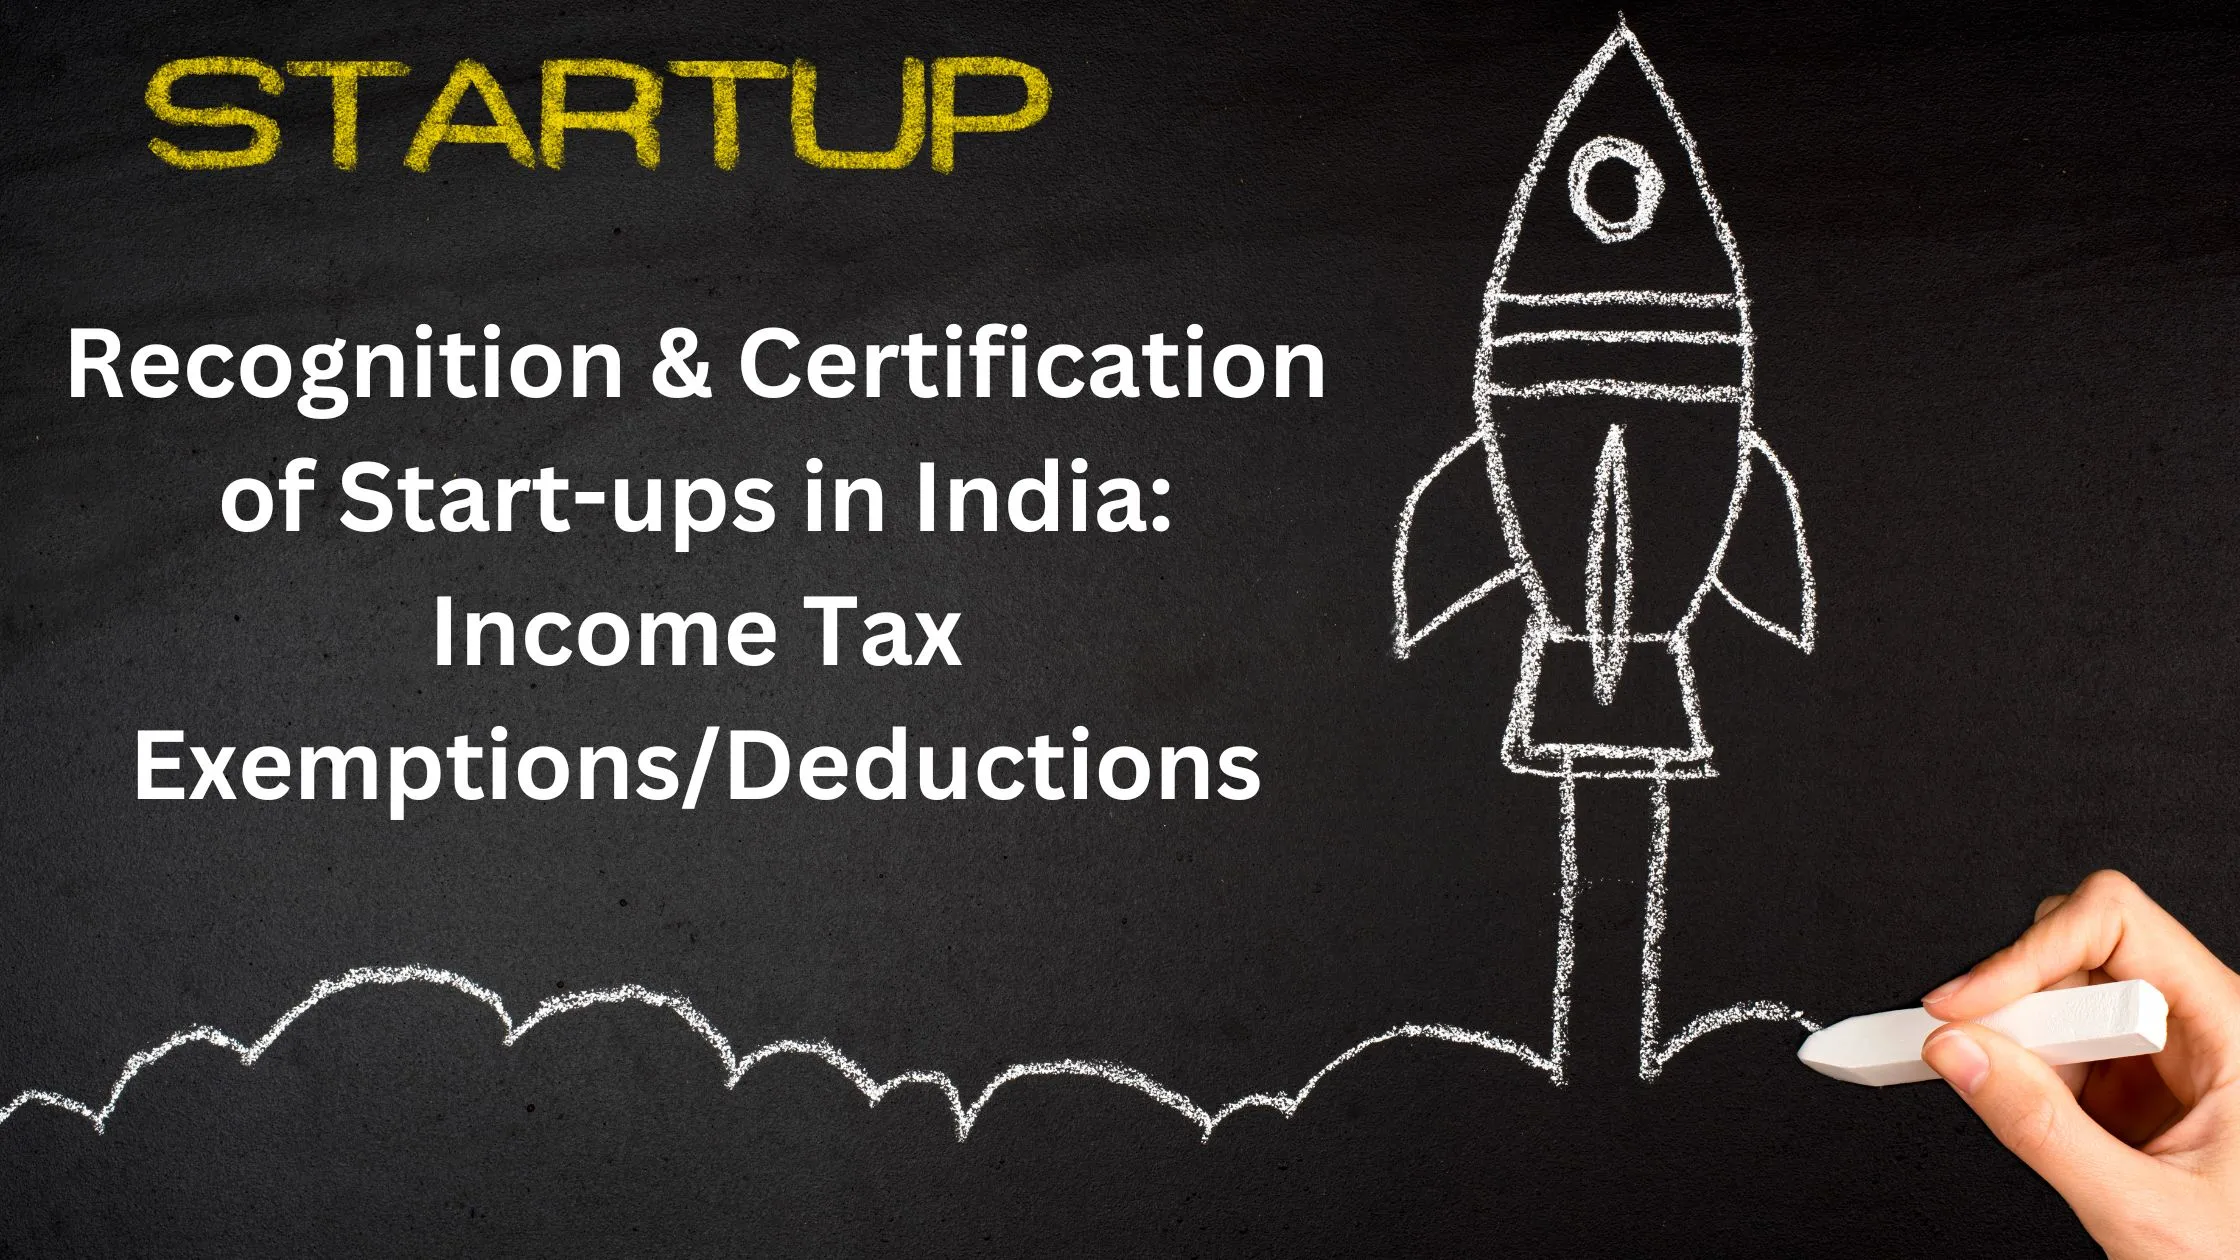 Recognition & Certification of Start-ups in India & Income Tax Exemptions/Deductions